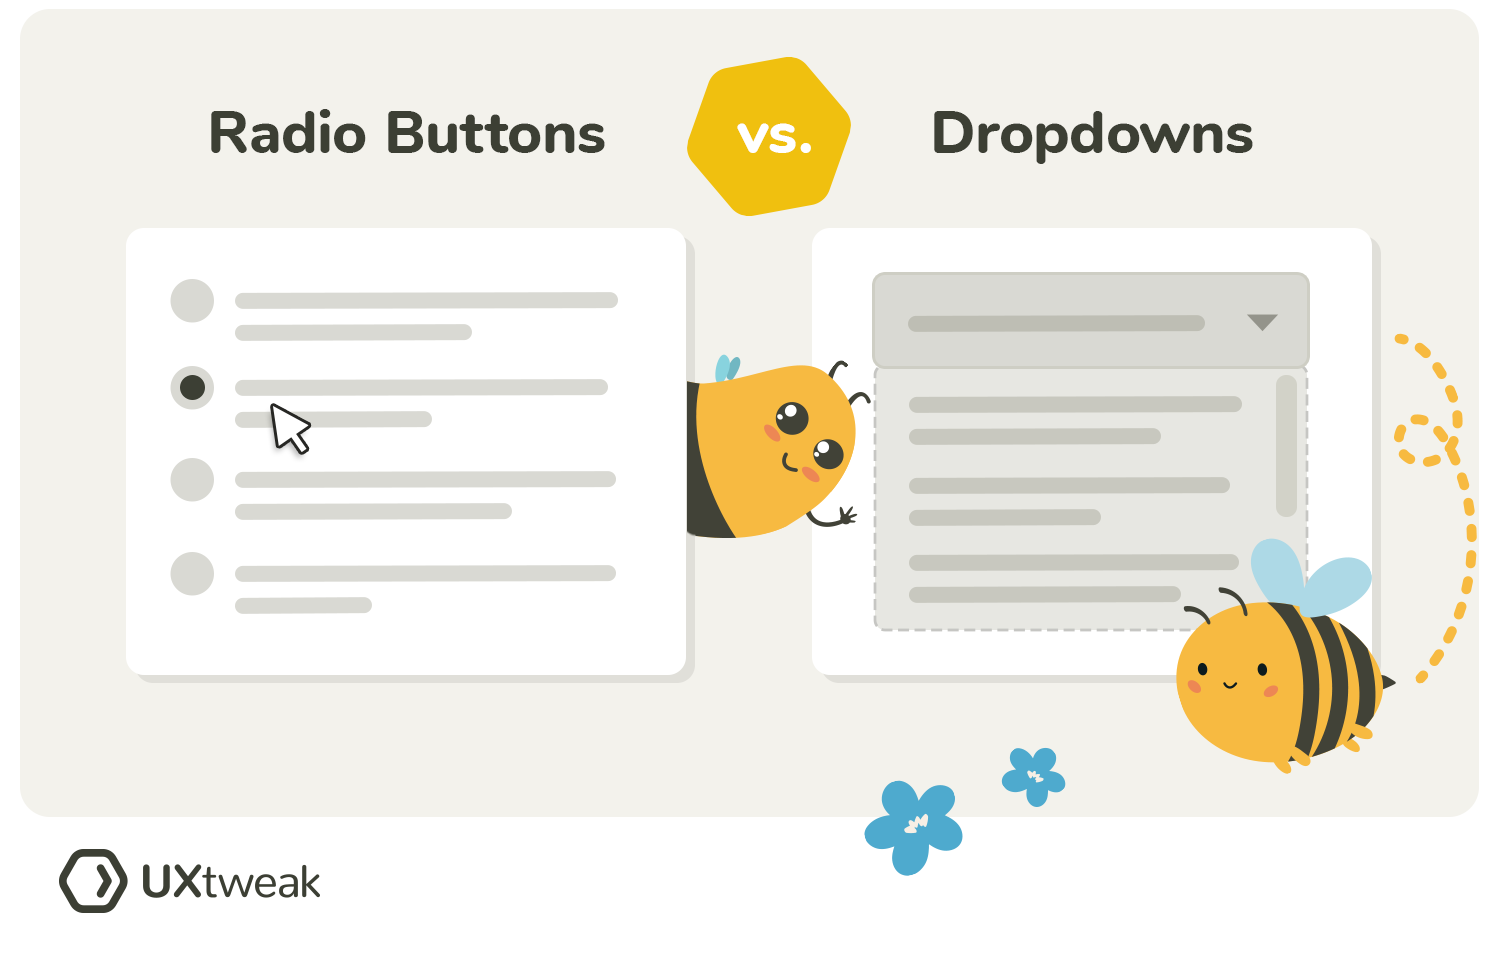 concept testing questions using radio buttons vs dropdowns